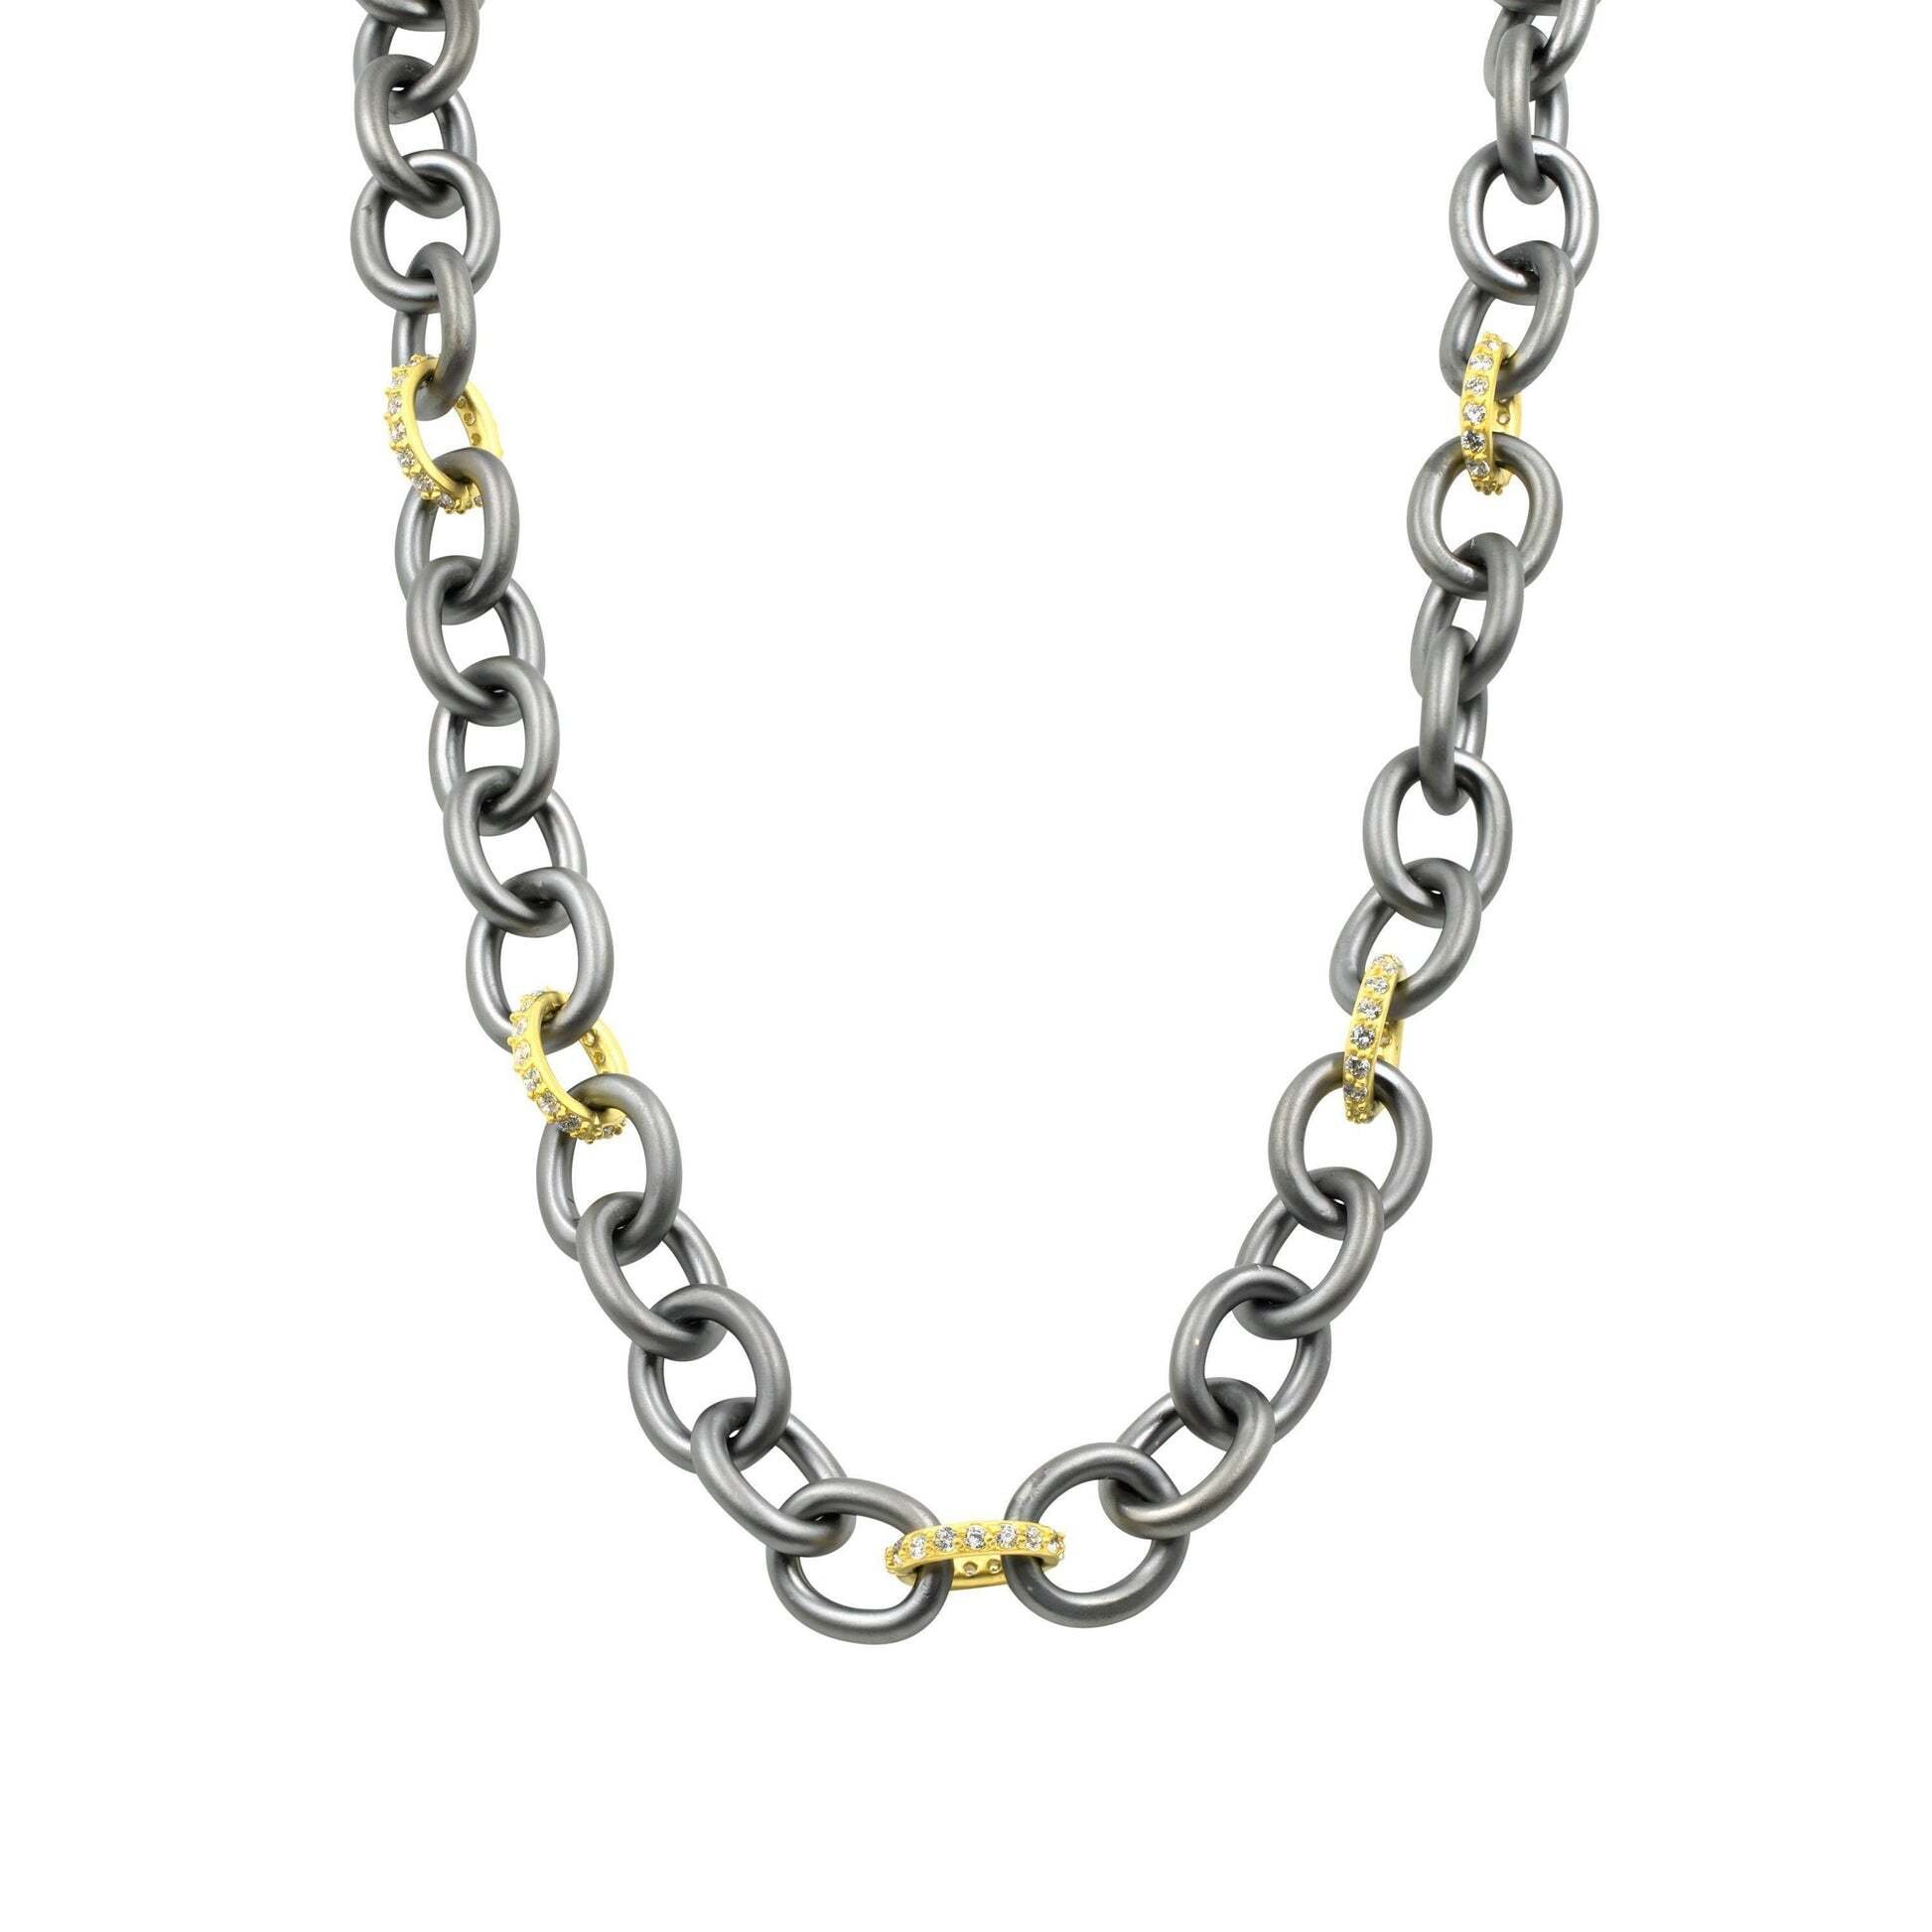 Heavy Alternating Chain Link Necklace